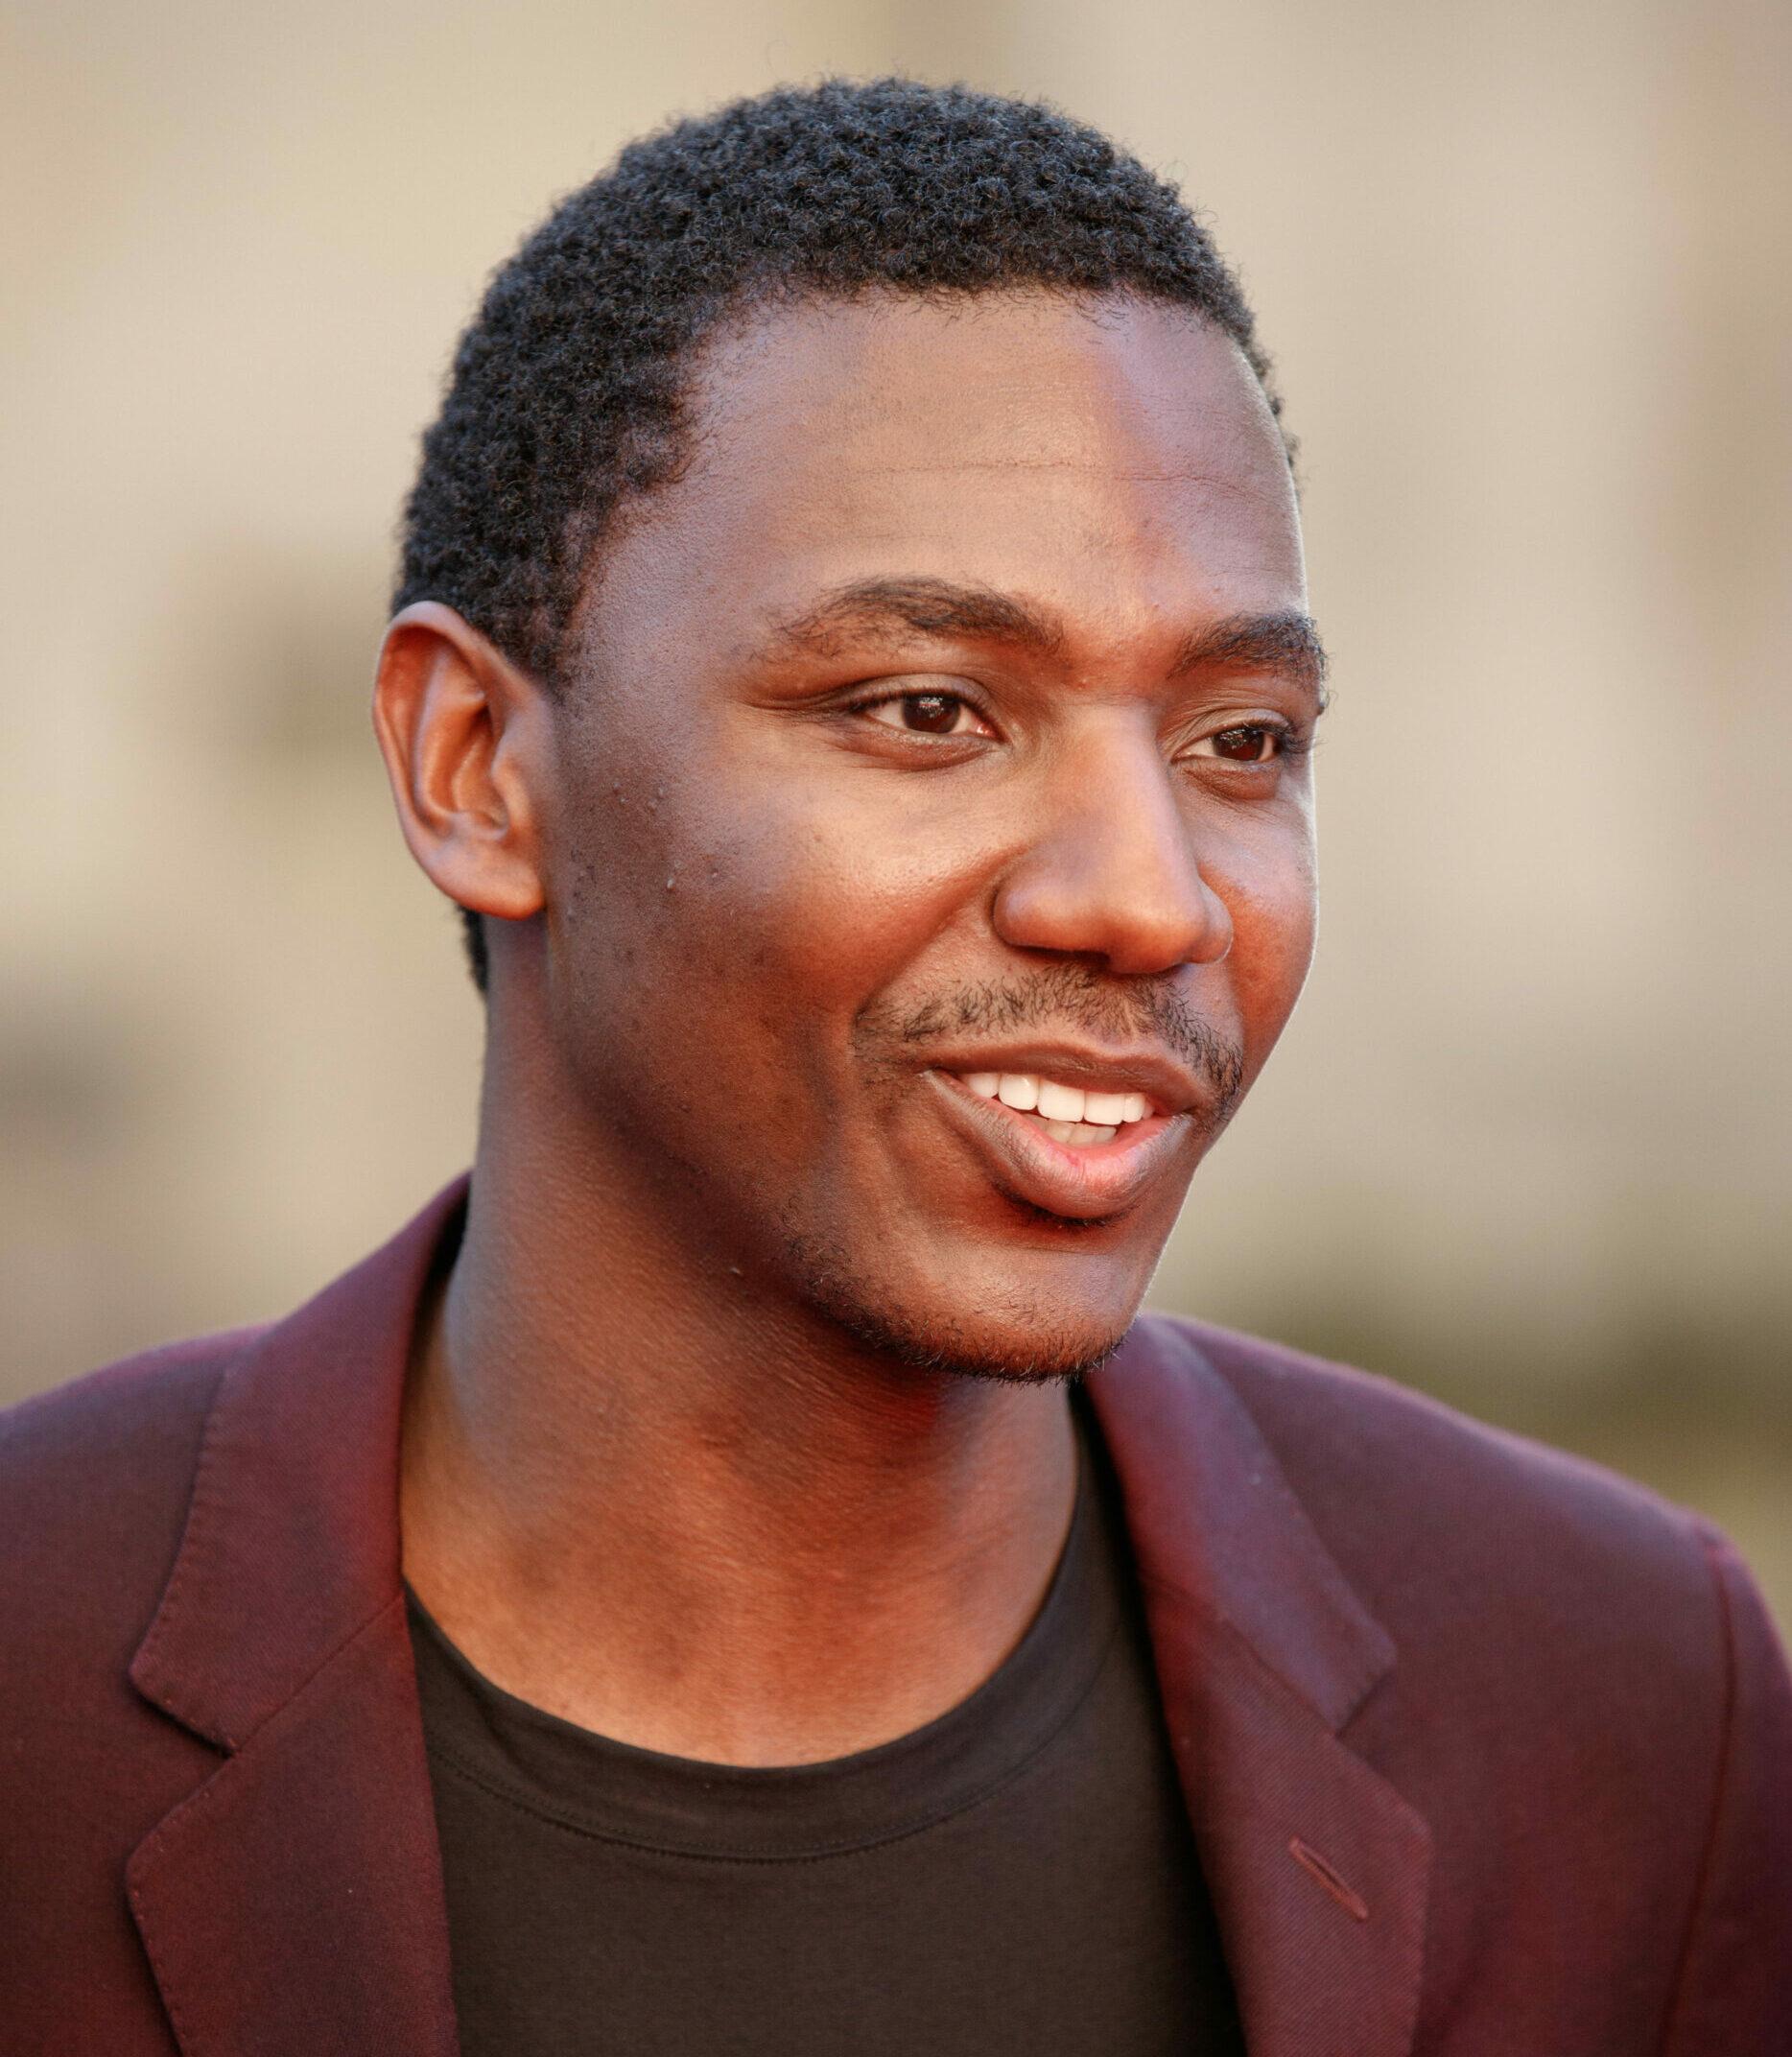 Actor Jerrod Carmichael arrives on the red carpet at the Transformers The Last Knight movie premiere on June 20, 2017 in Chicago.